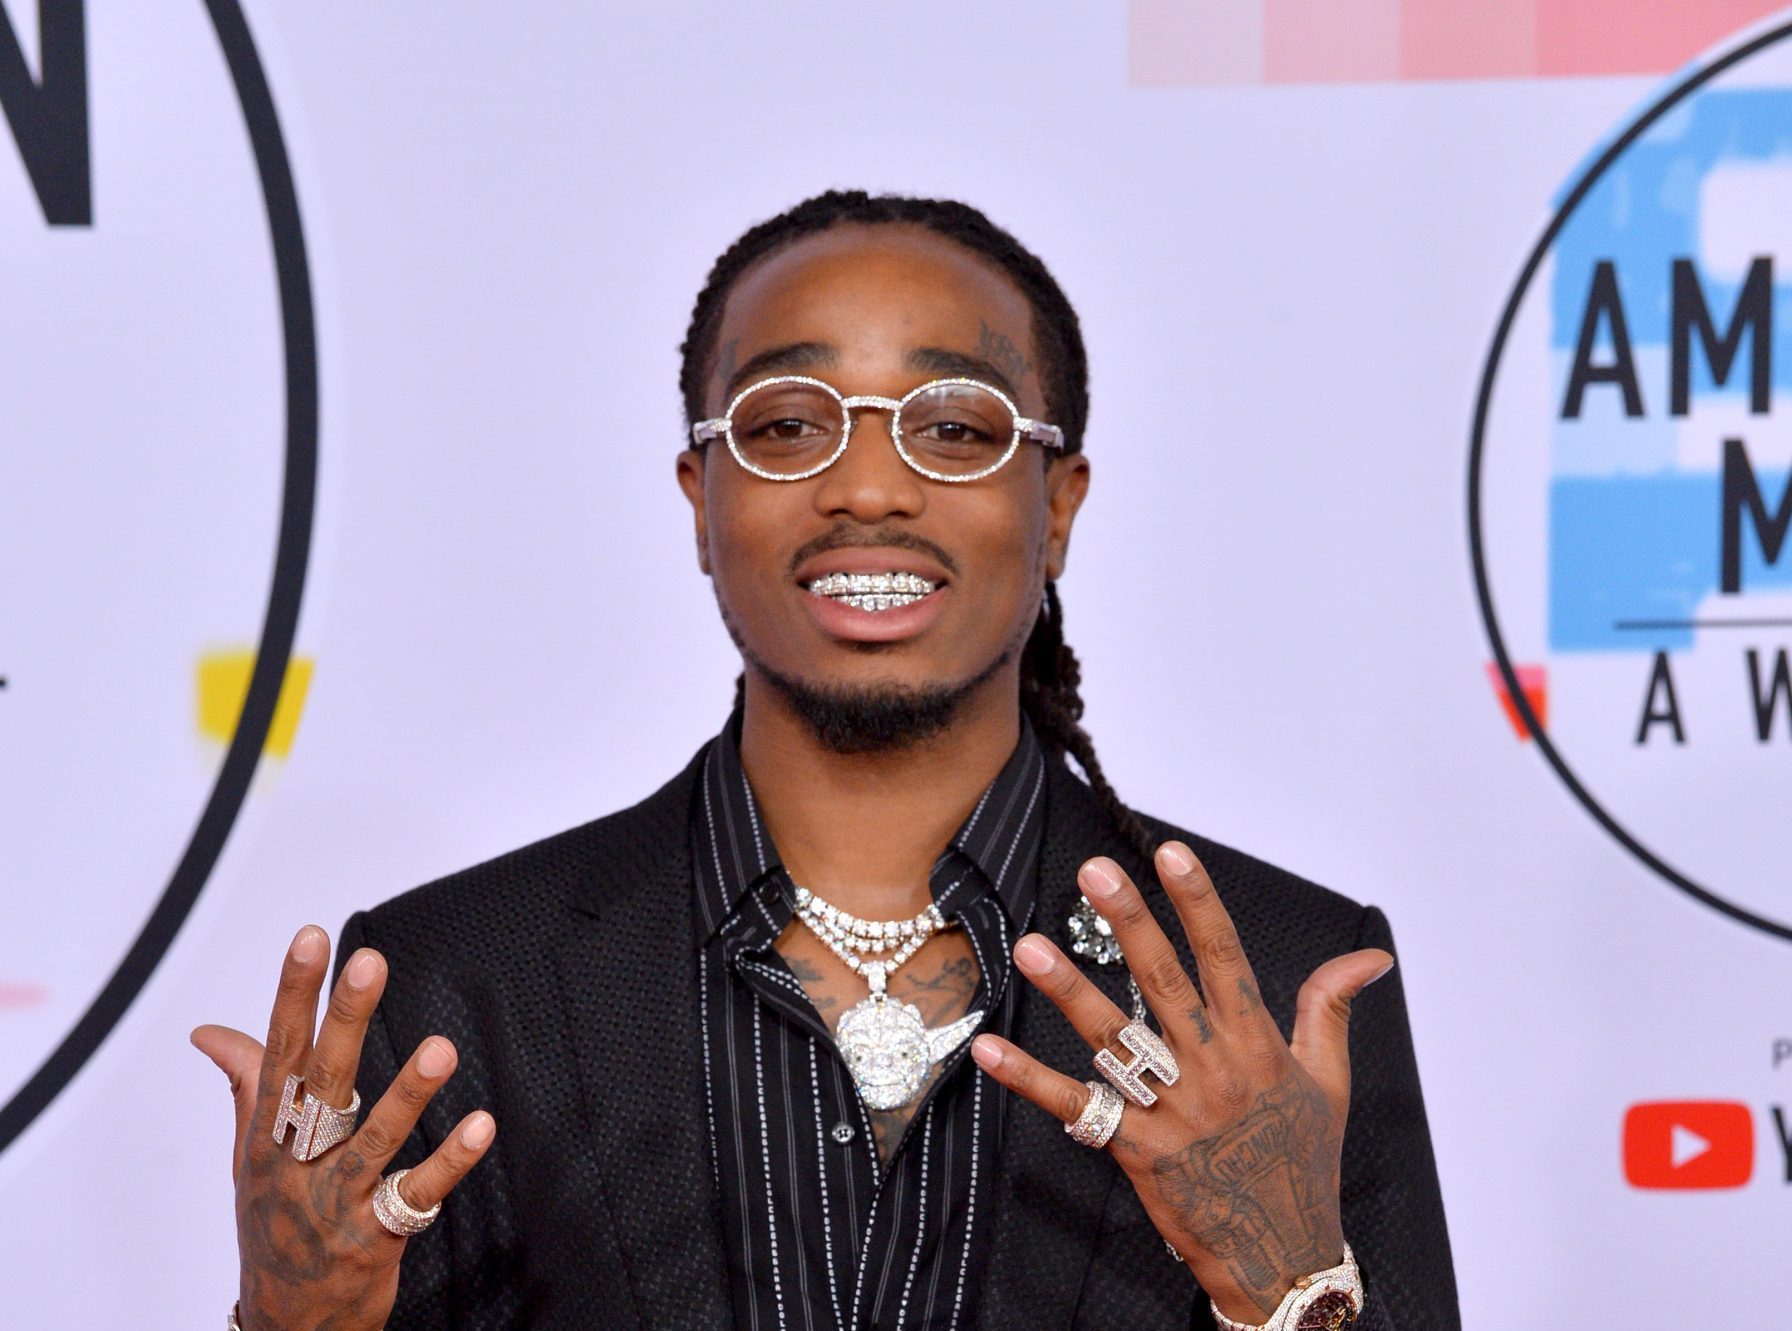 Quavo wants to follow in Andre 3000's footsteps